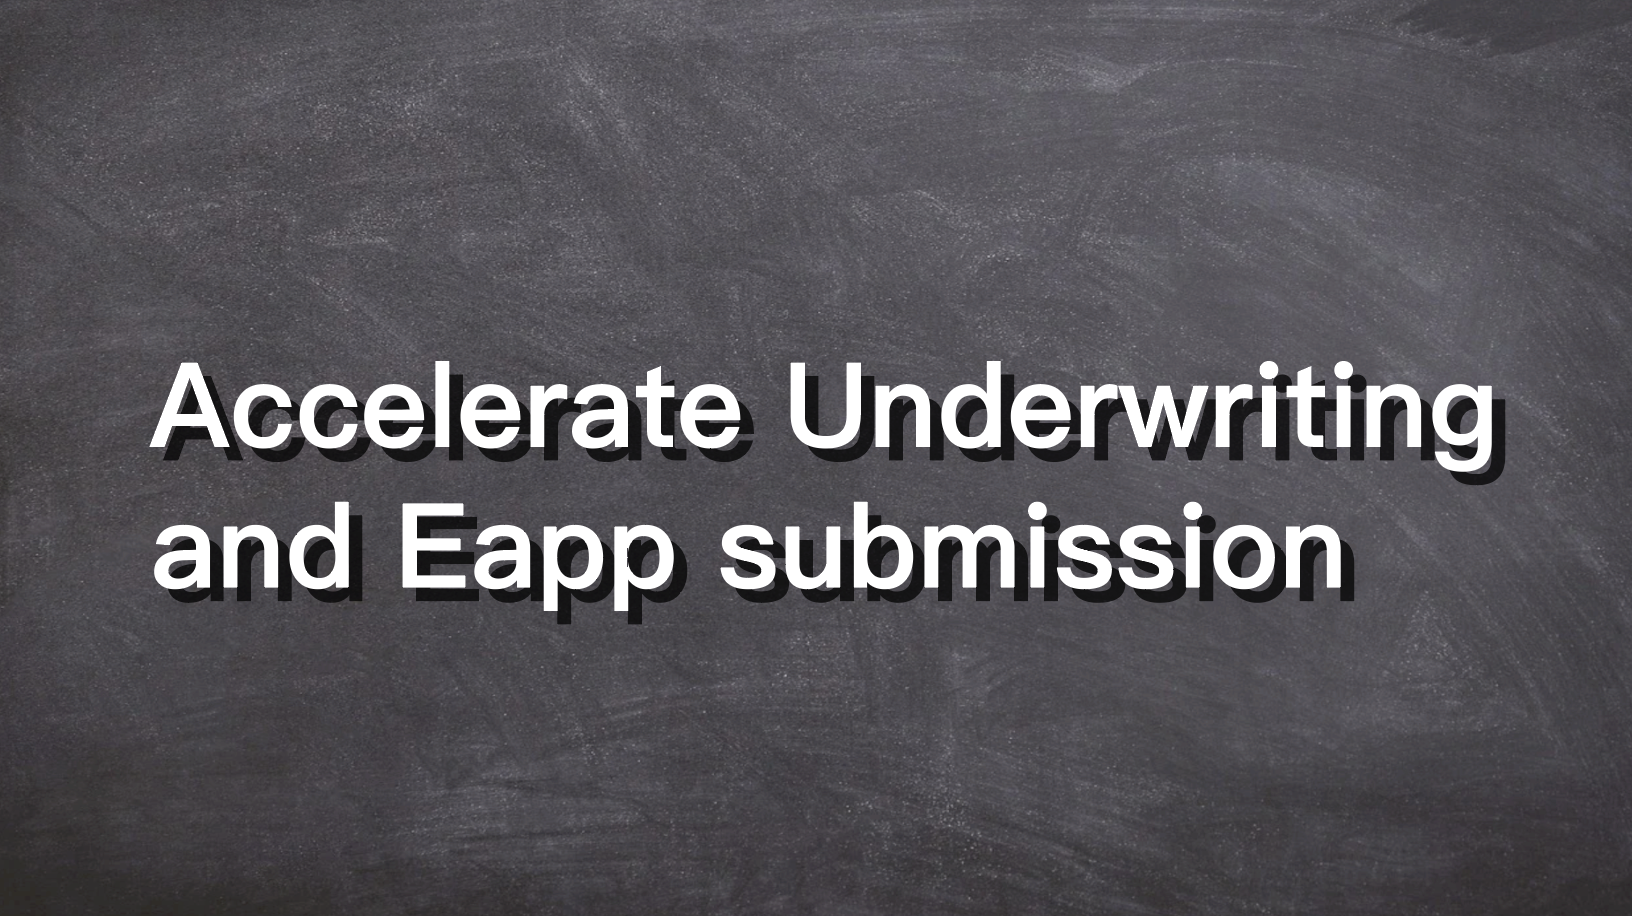 Accelerate Underwriting and Eapp submission